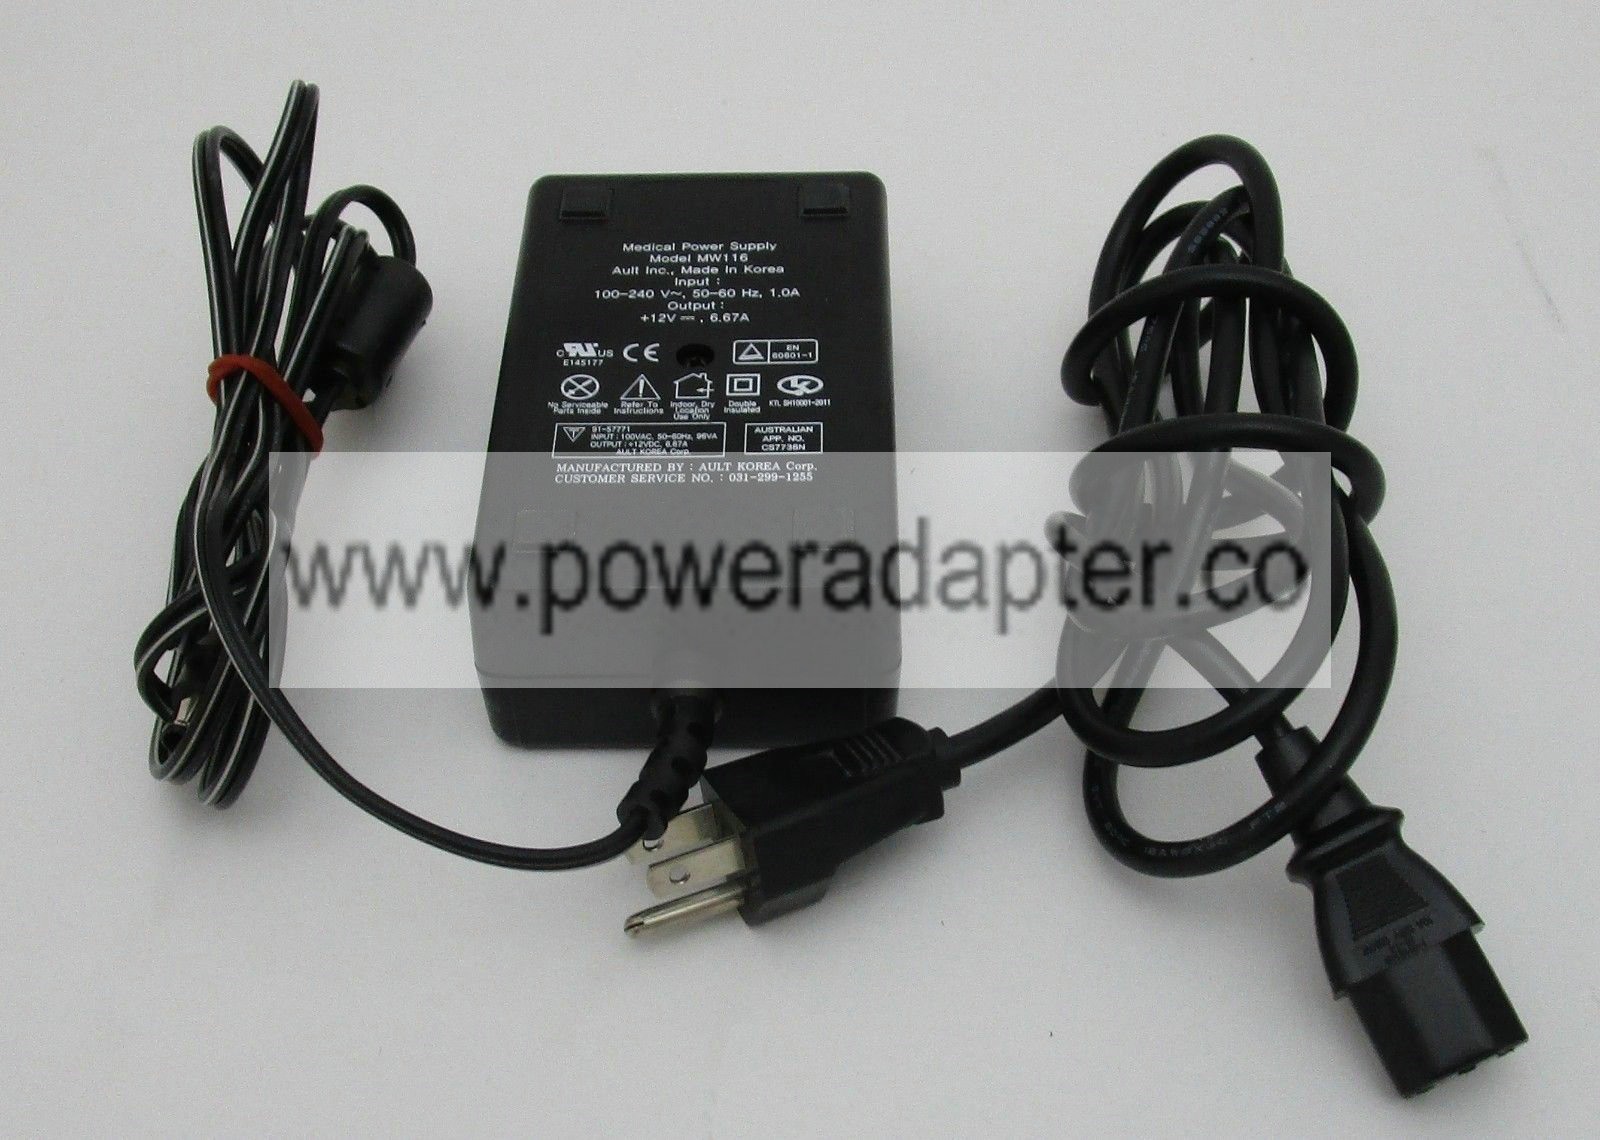 New Ault 12V 6.67A Medical Power Supply AC Power Adapter MW116 Type: AC/Standard Modified Item: No MPN: MW116 Custom